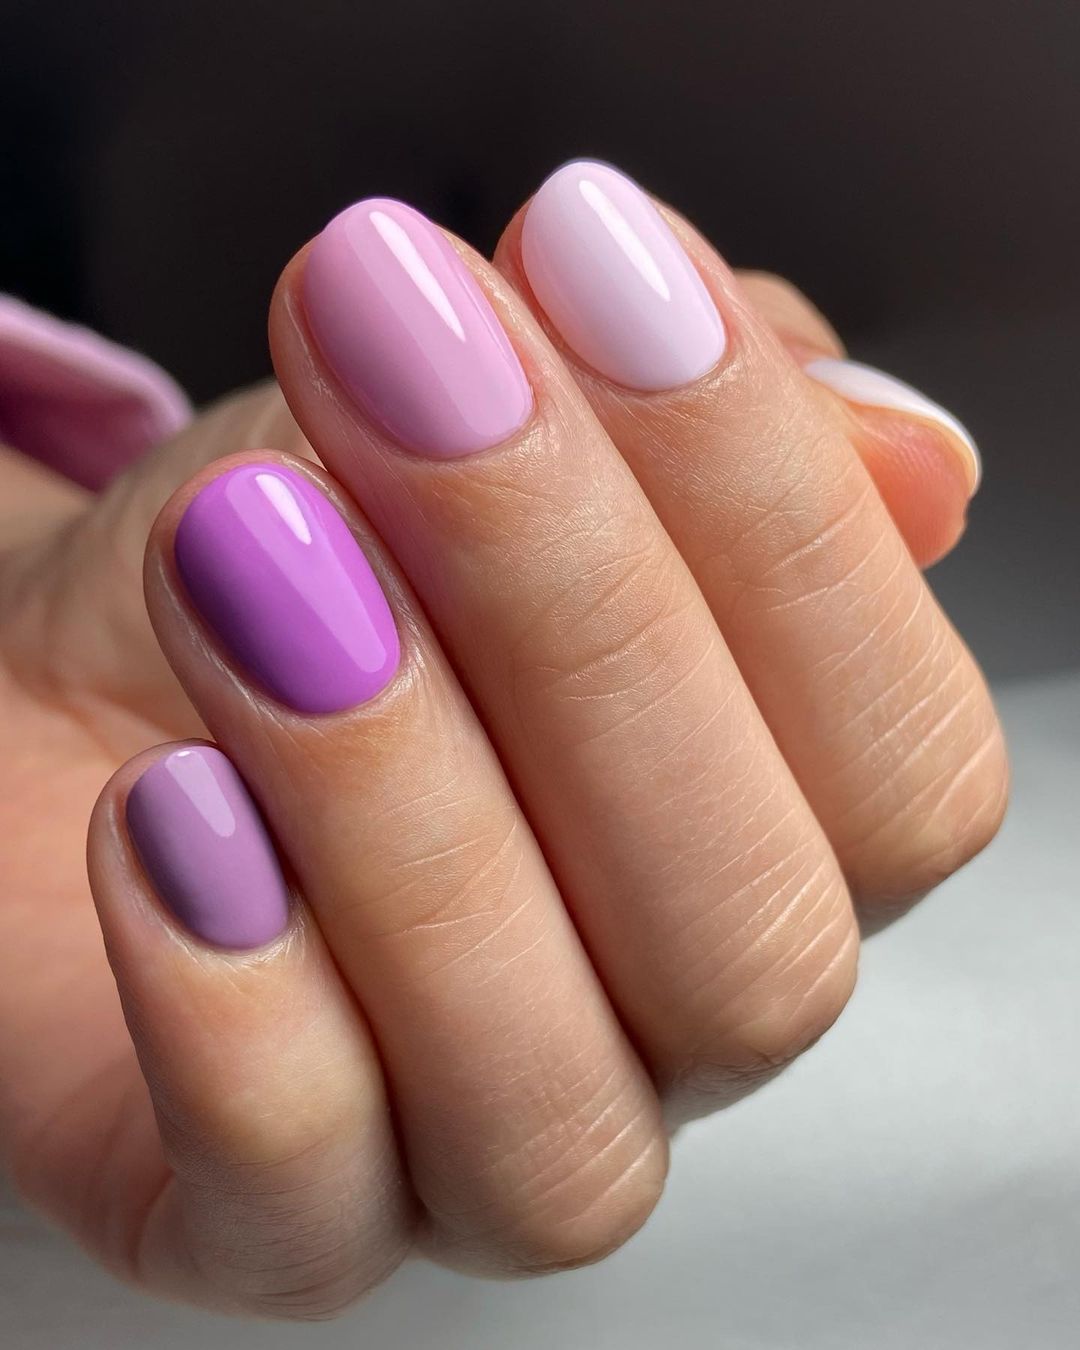 Short Pink and Purple Nails